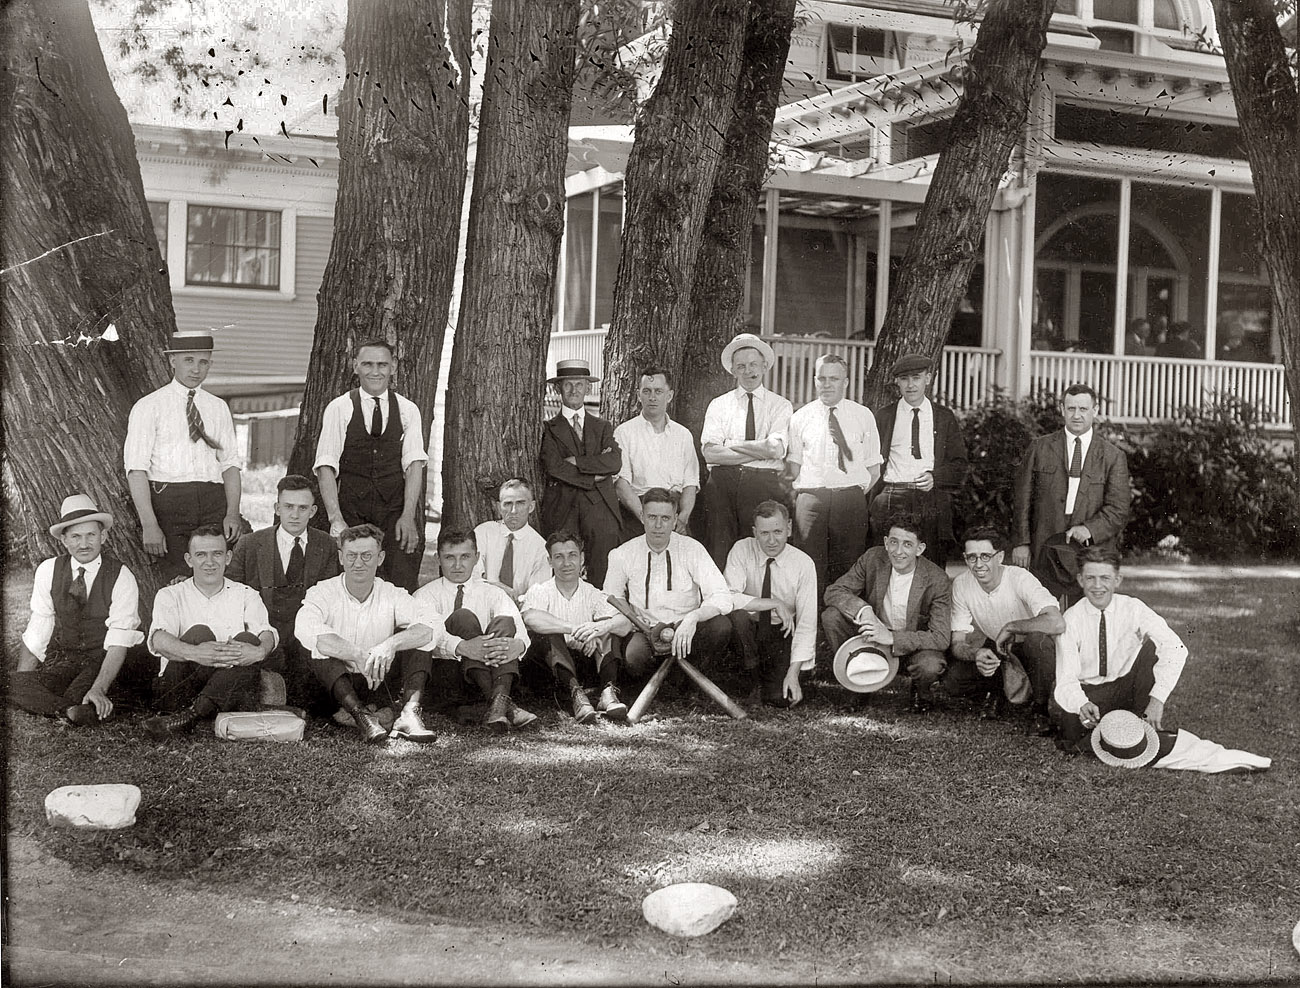 After a baseball game the Raybestos Company employee team is shown relaxing at the Brooklawn Country Club in Fairfield, Connecticut. My father, James Edward McKenna, fourth from the left in the back row, is leaning against a tree. Picture was taken about 1917. From the several smiles on their faces, I imagine that they won the game that day. - Robert Edward McKenna View full size.